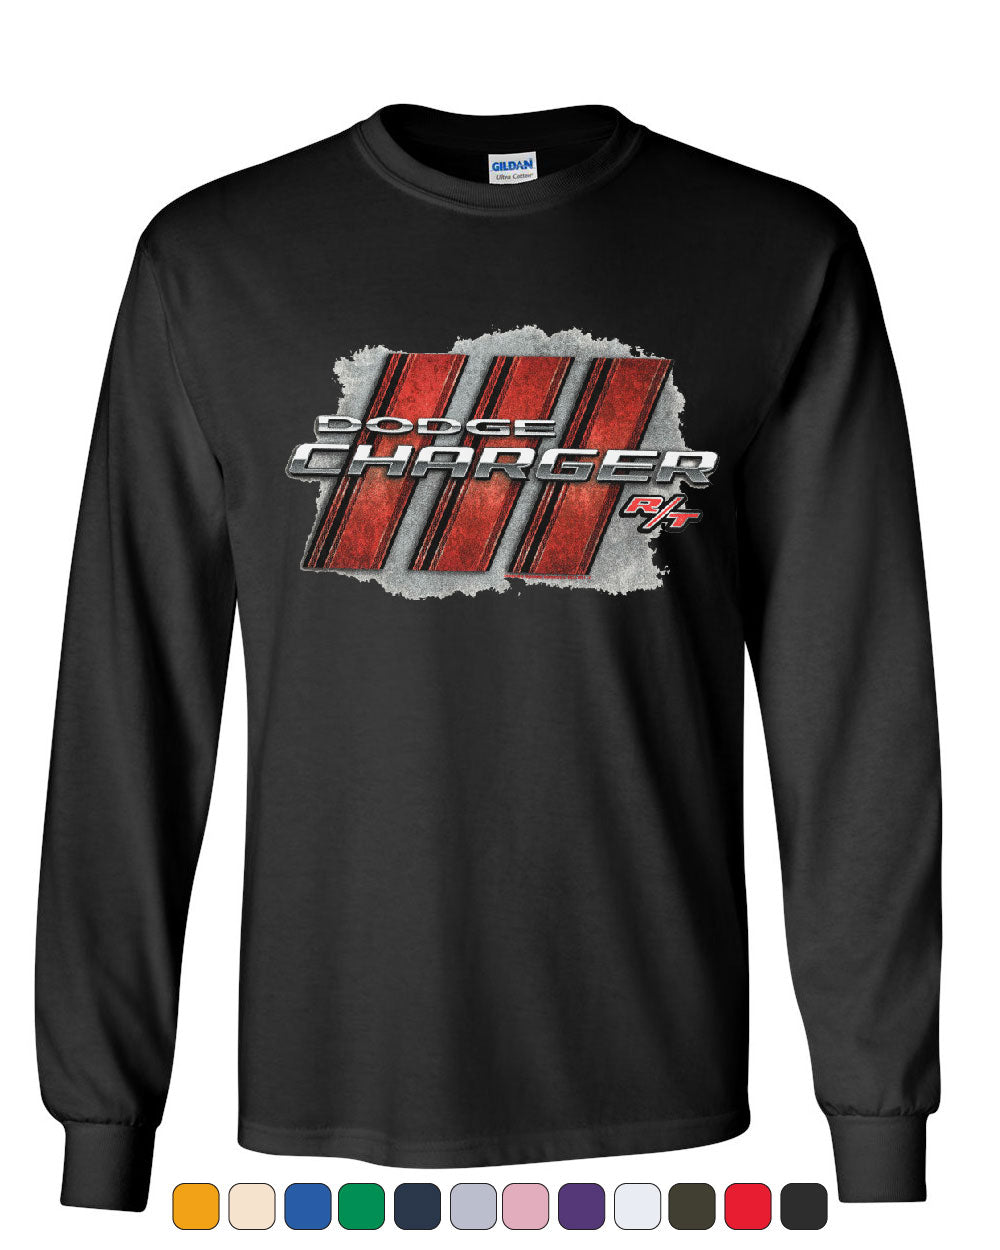 Dodge Charger R/T Long Sleeve T-Shirt American Muscle Car Tee | eBay